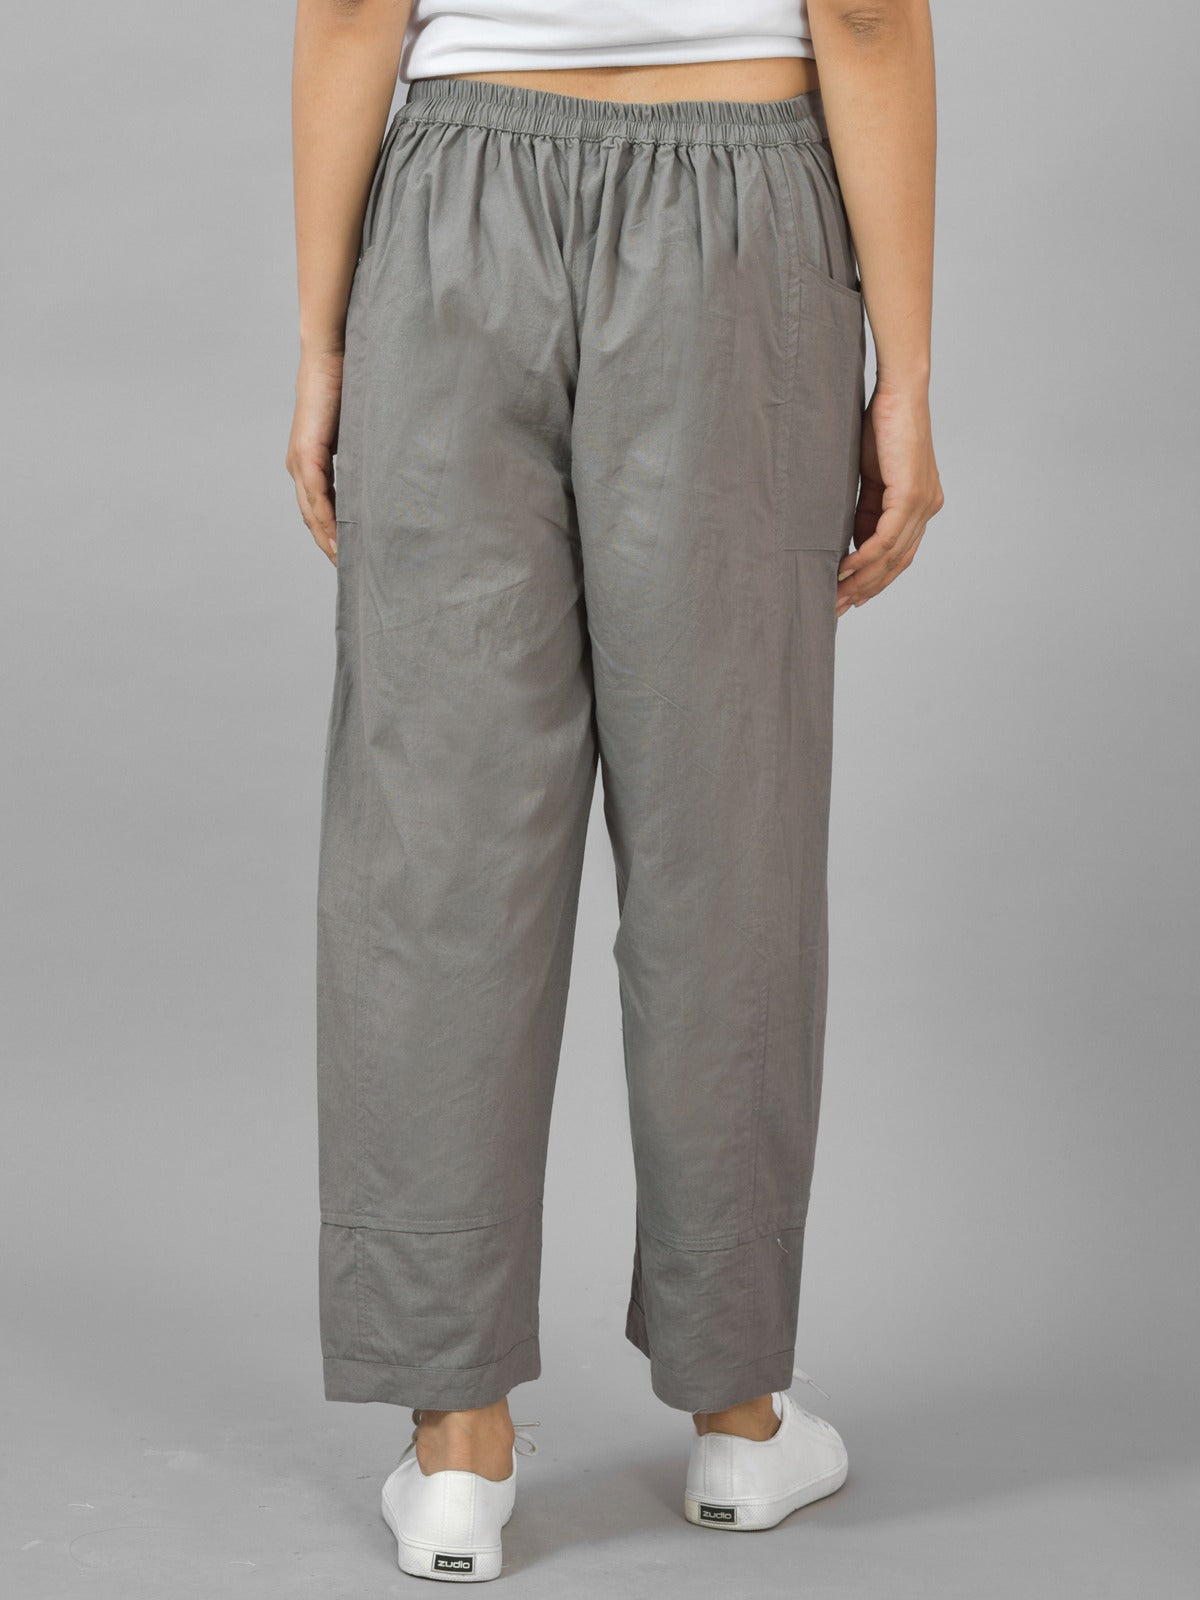 Combo Pack Of Womens White And Grey Side Pocket Straight Cargo Pants